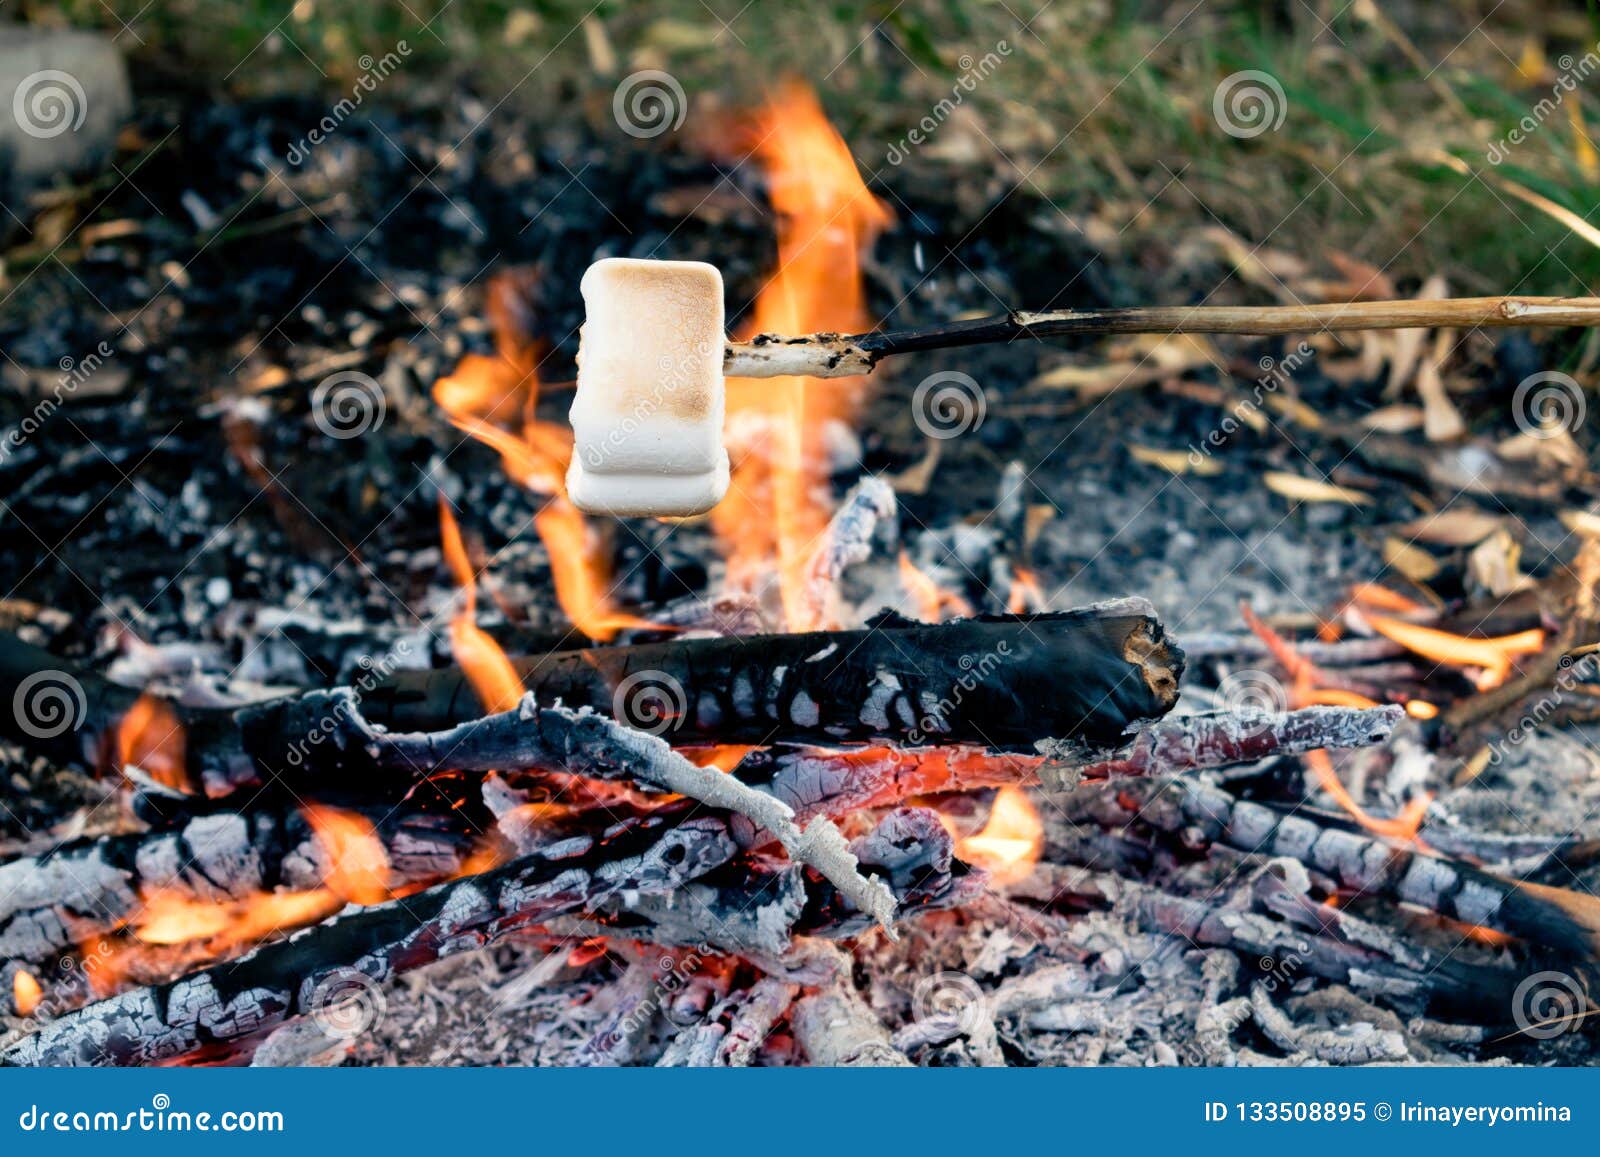 Delicious and Sweet Marshmallows on Stick Over the Bonfire Stock Image ...